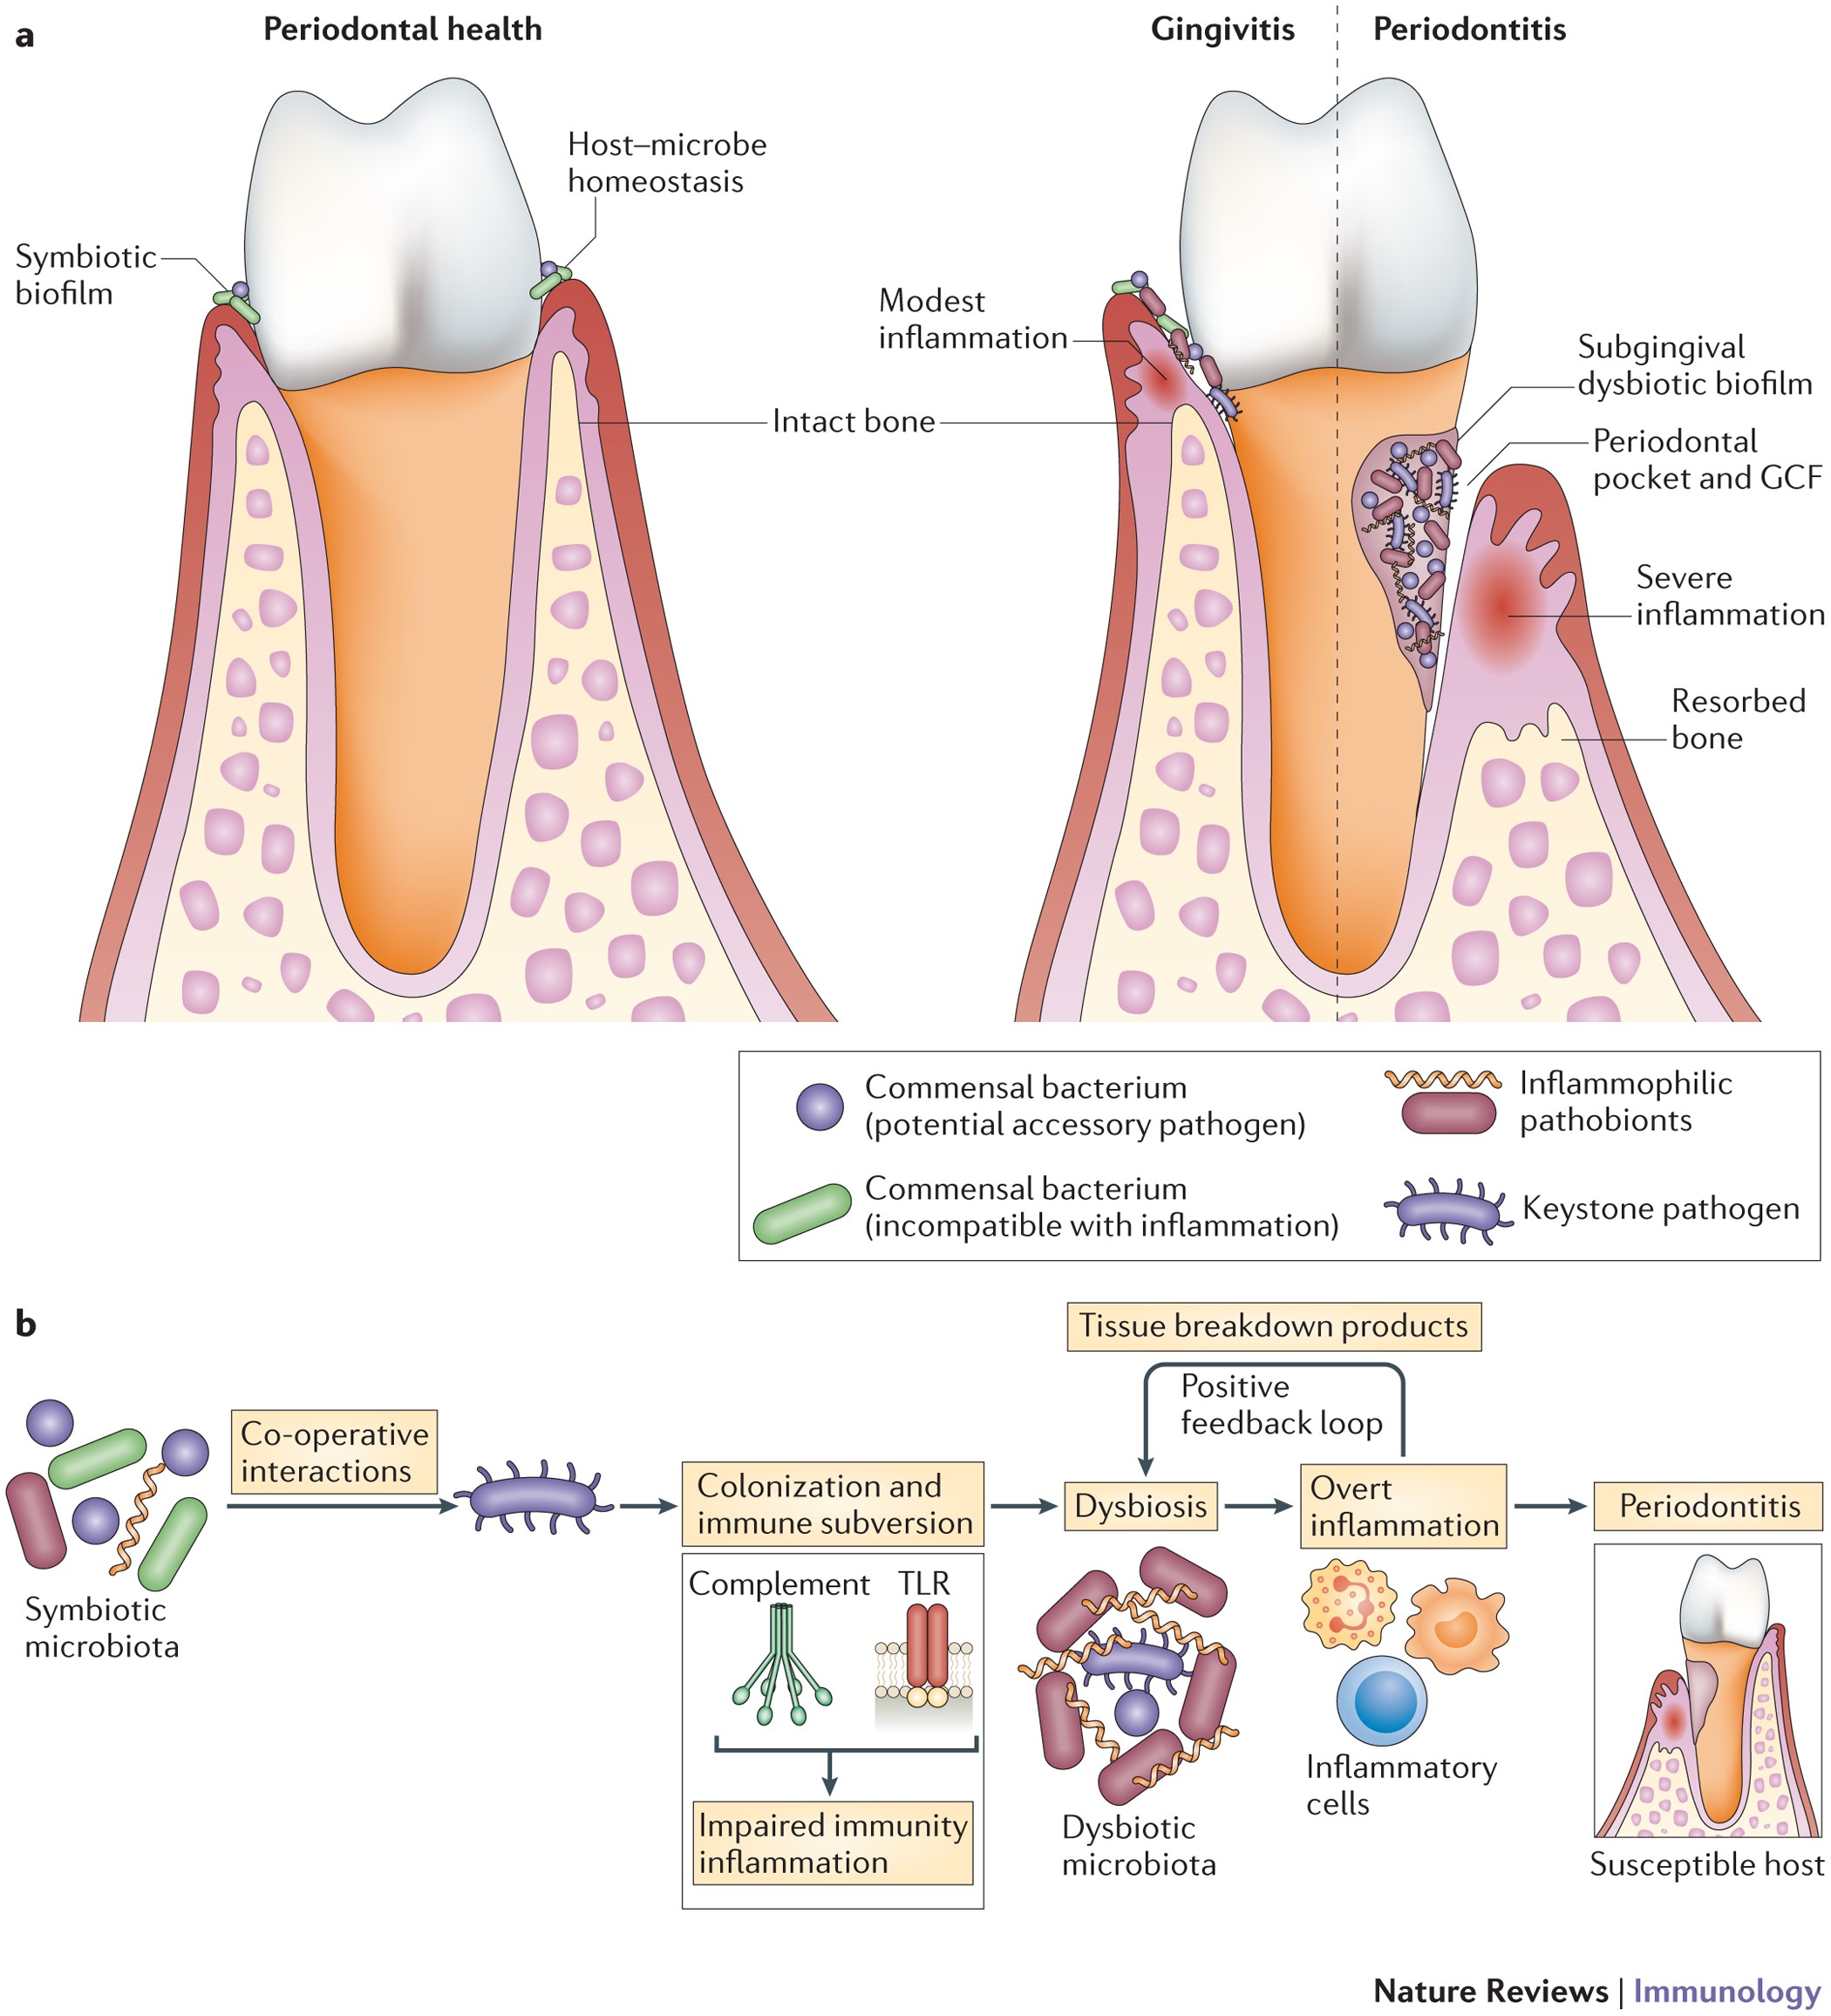 Nature Reviews Immunology - Periodontitis has been linked to systemic infla...